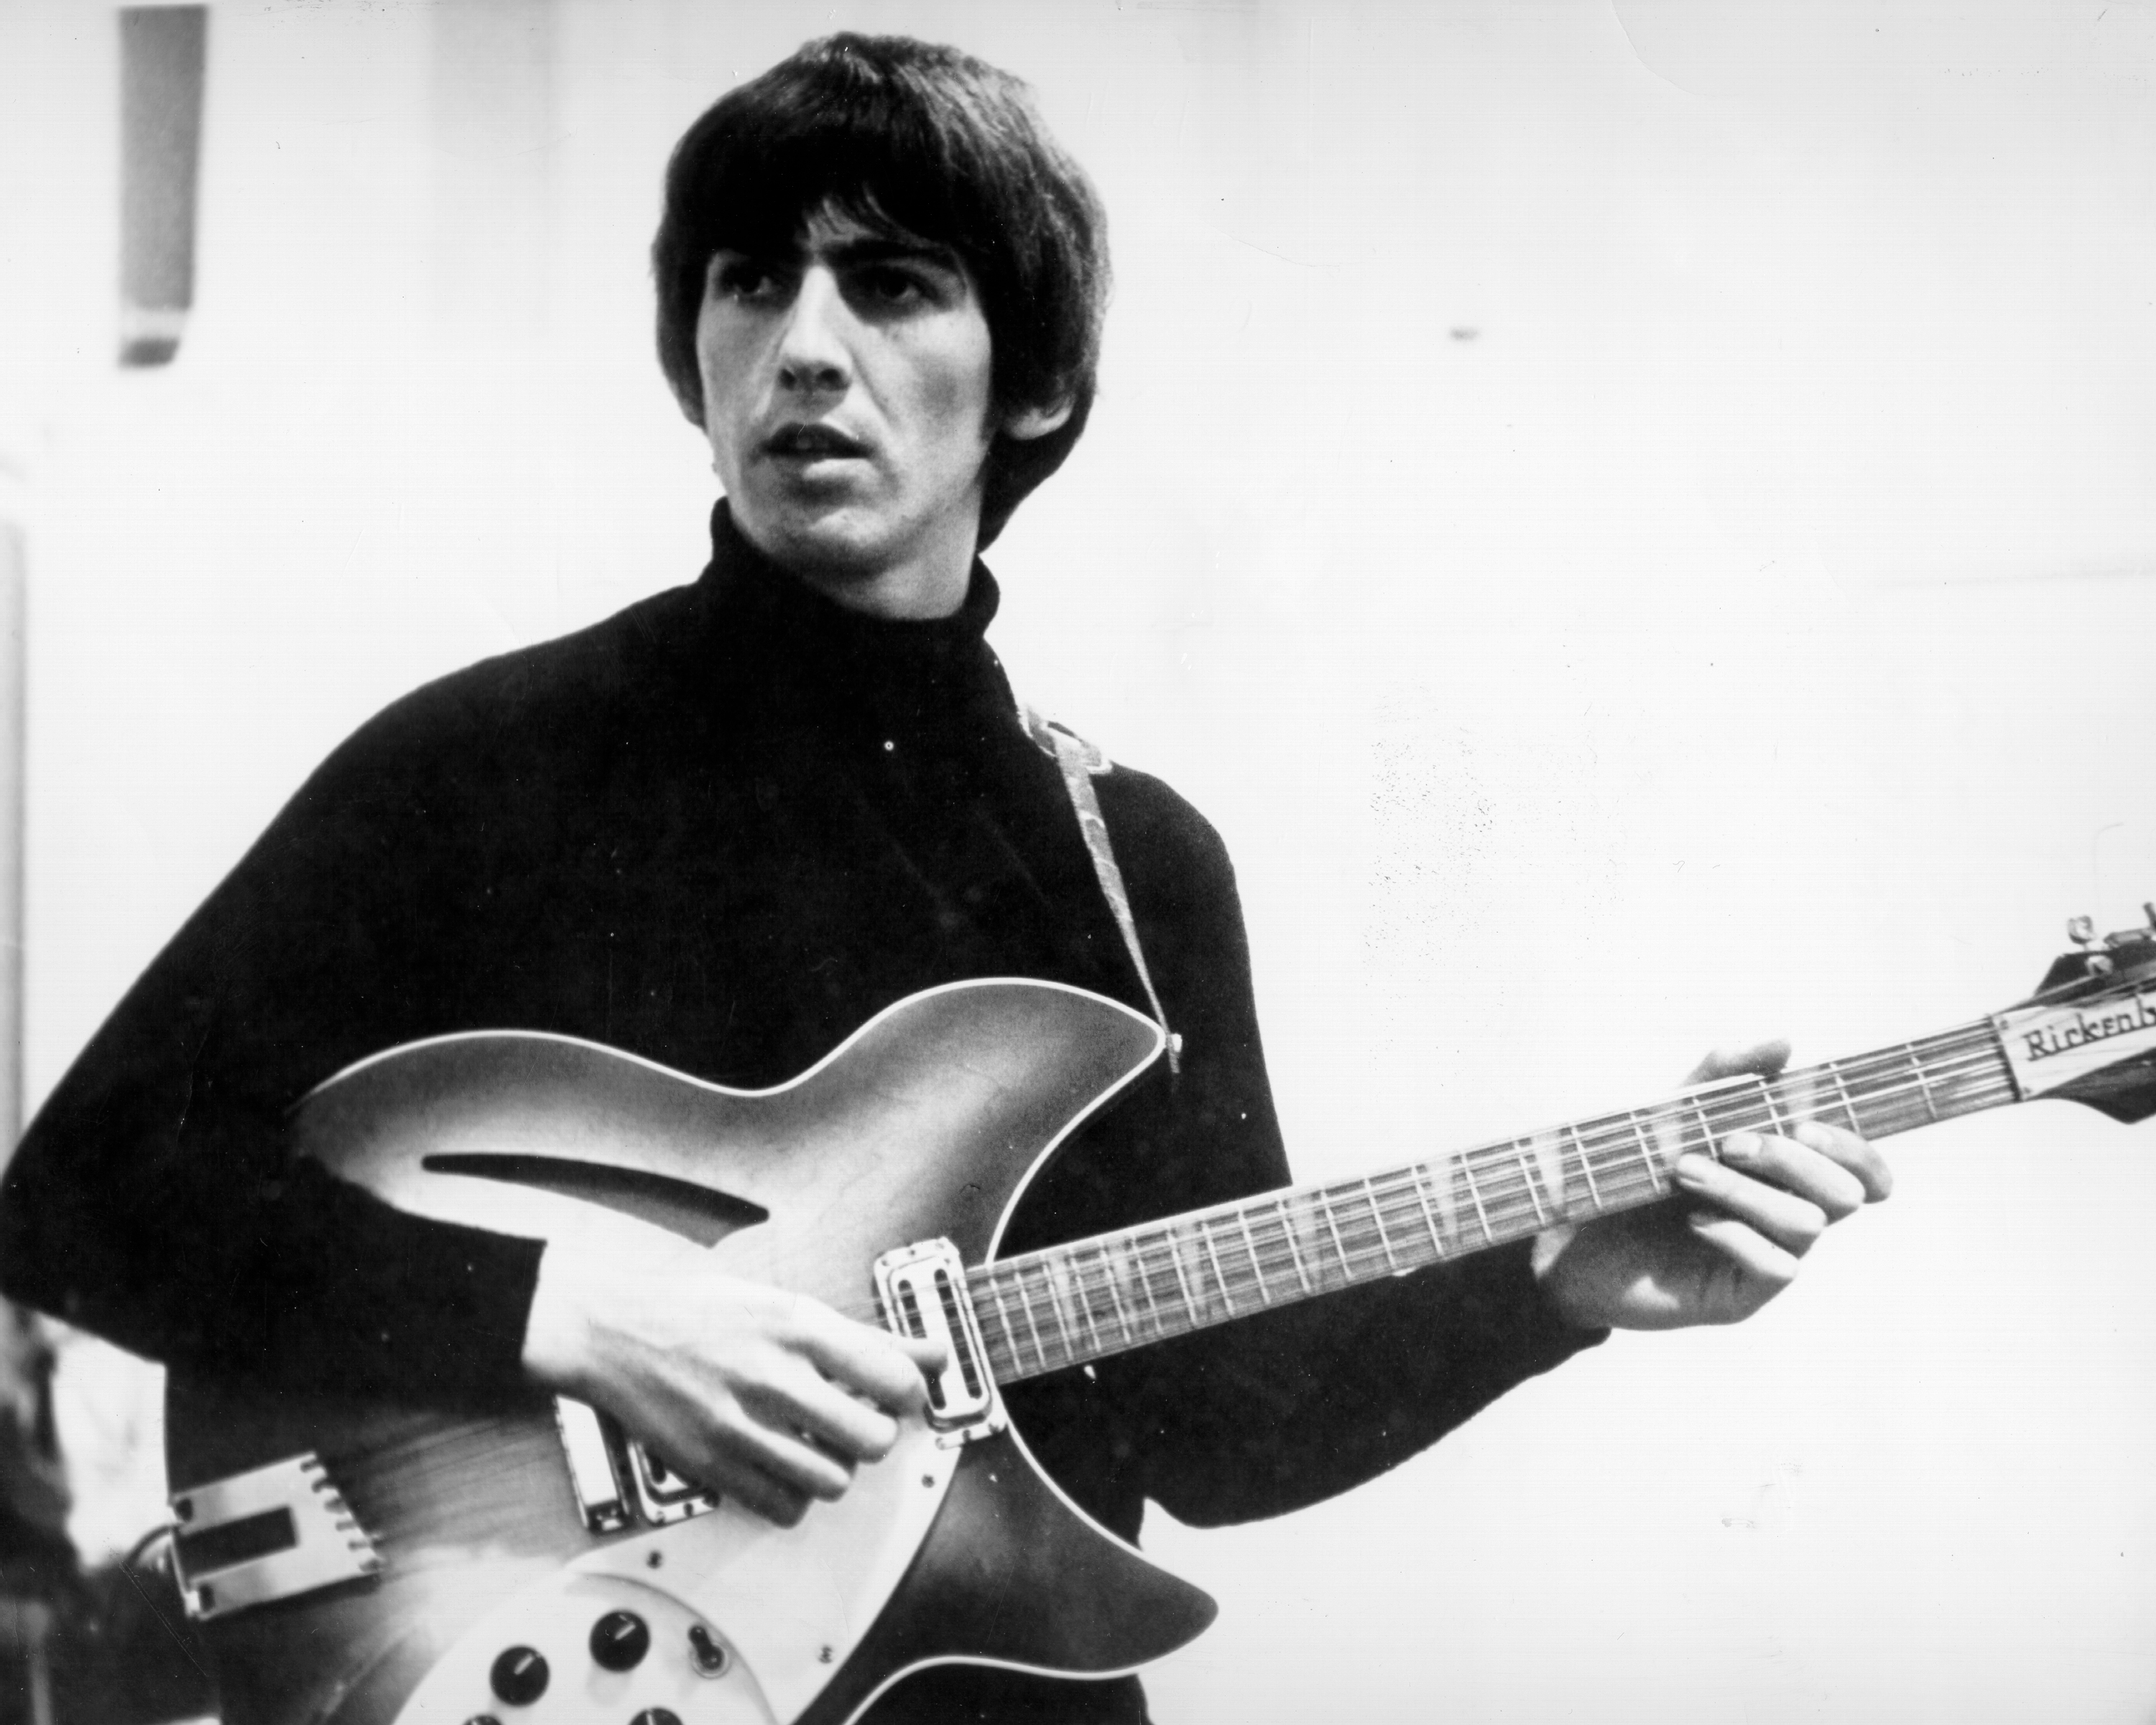 A black and white picture of George Harrison of The Beatles playing an electric guitar and wearing a turtleneck.